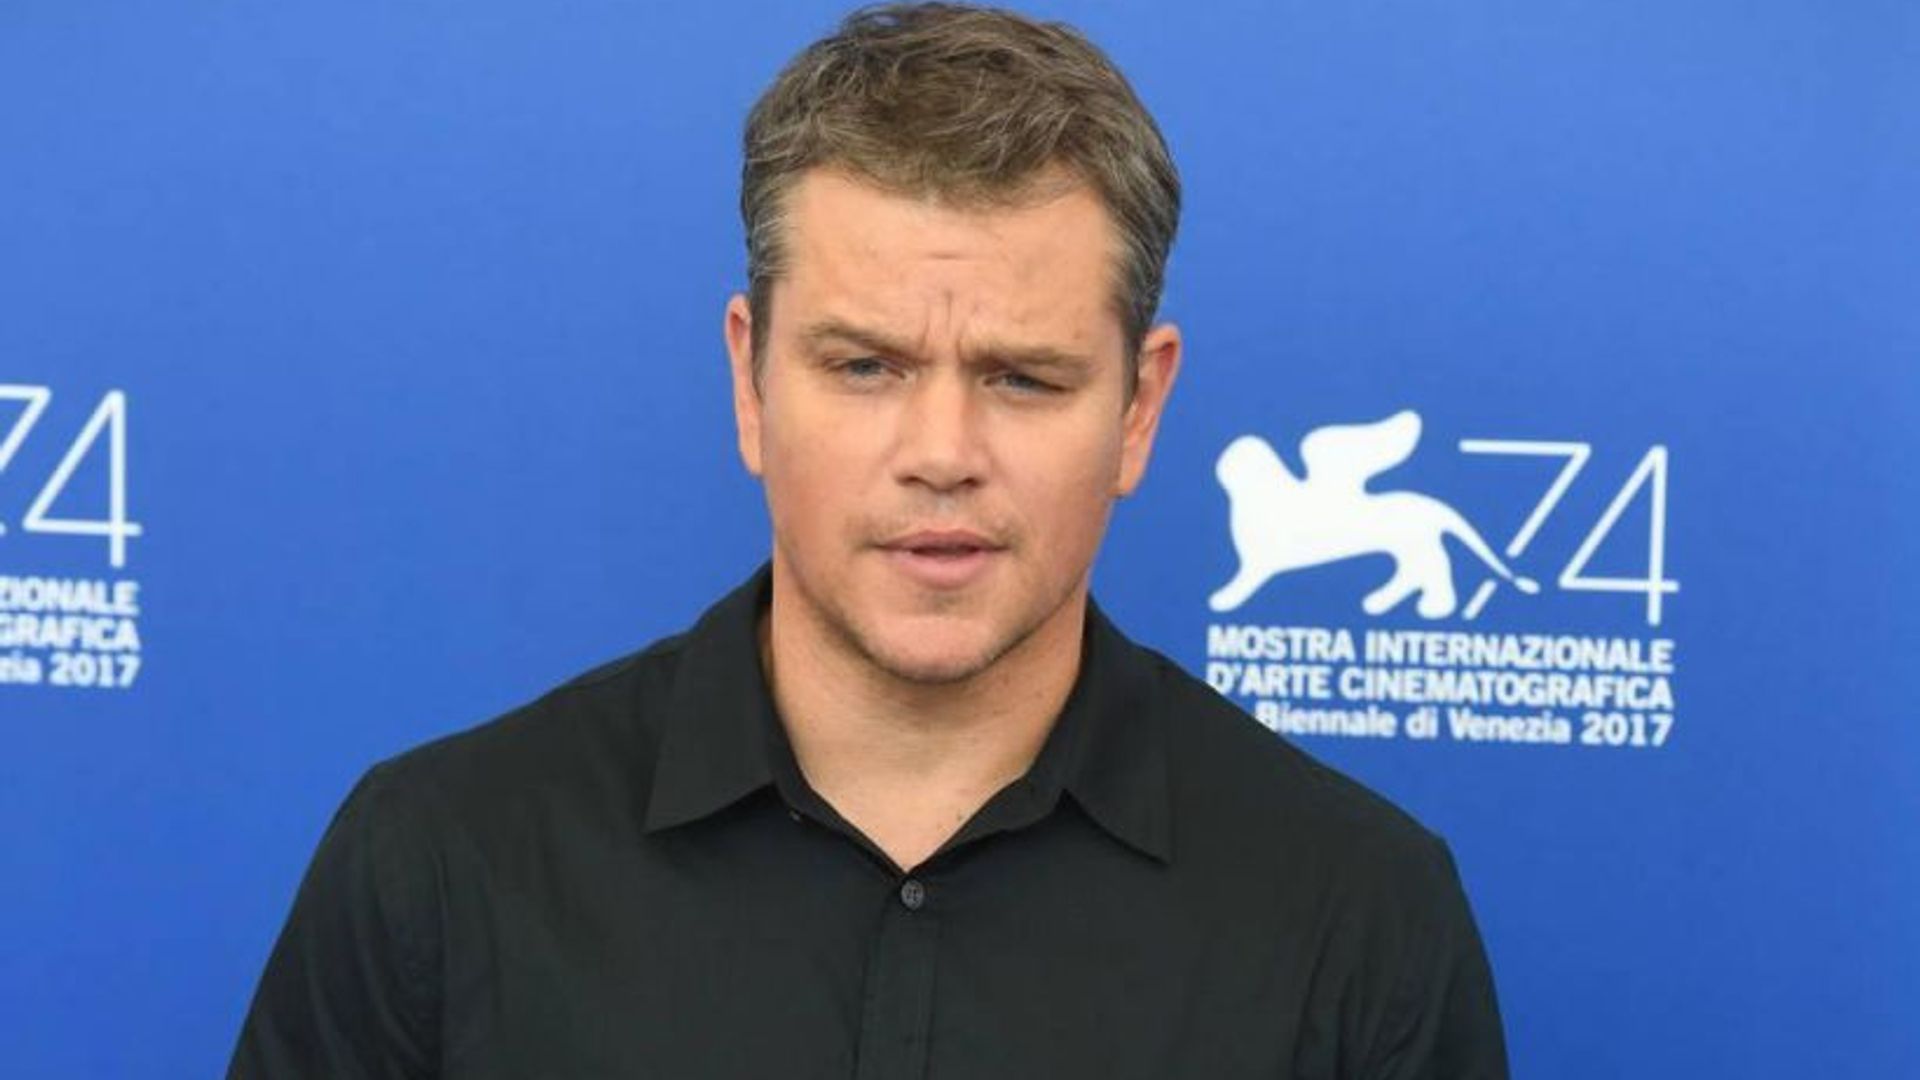 Matt Damon shares the details of his 'lame' diet and fitness regime